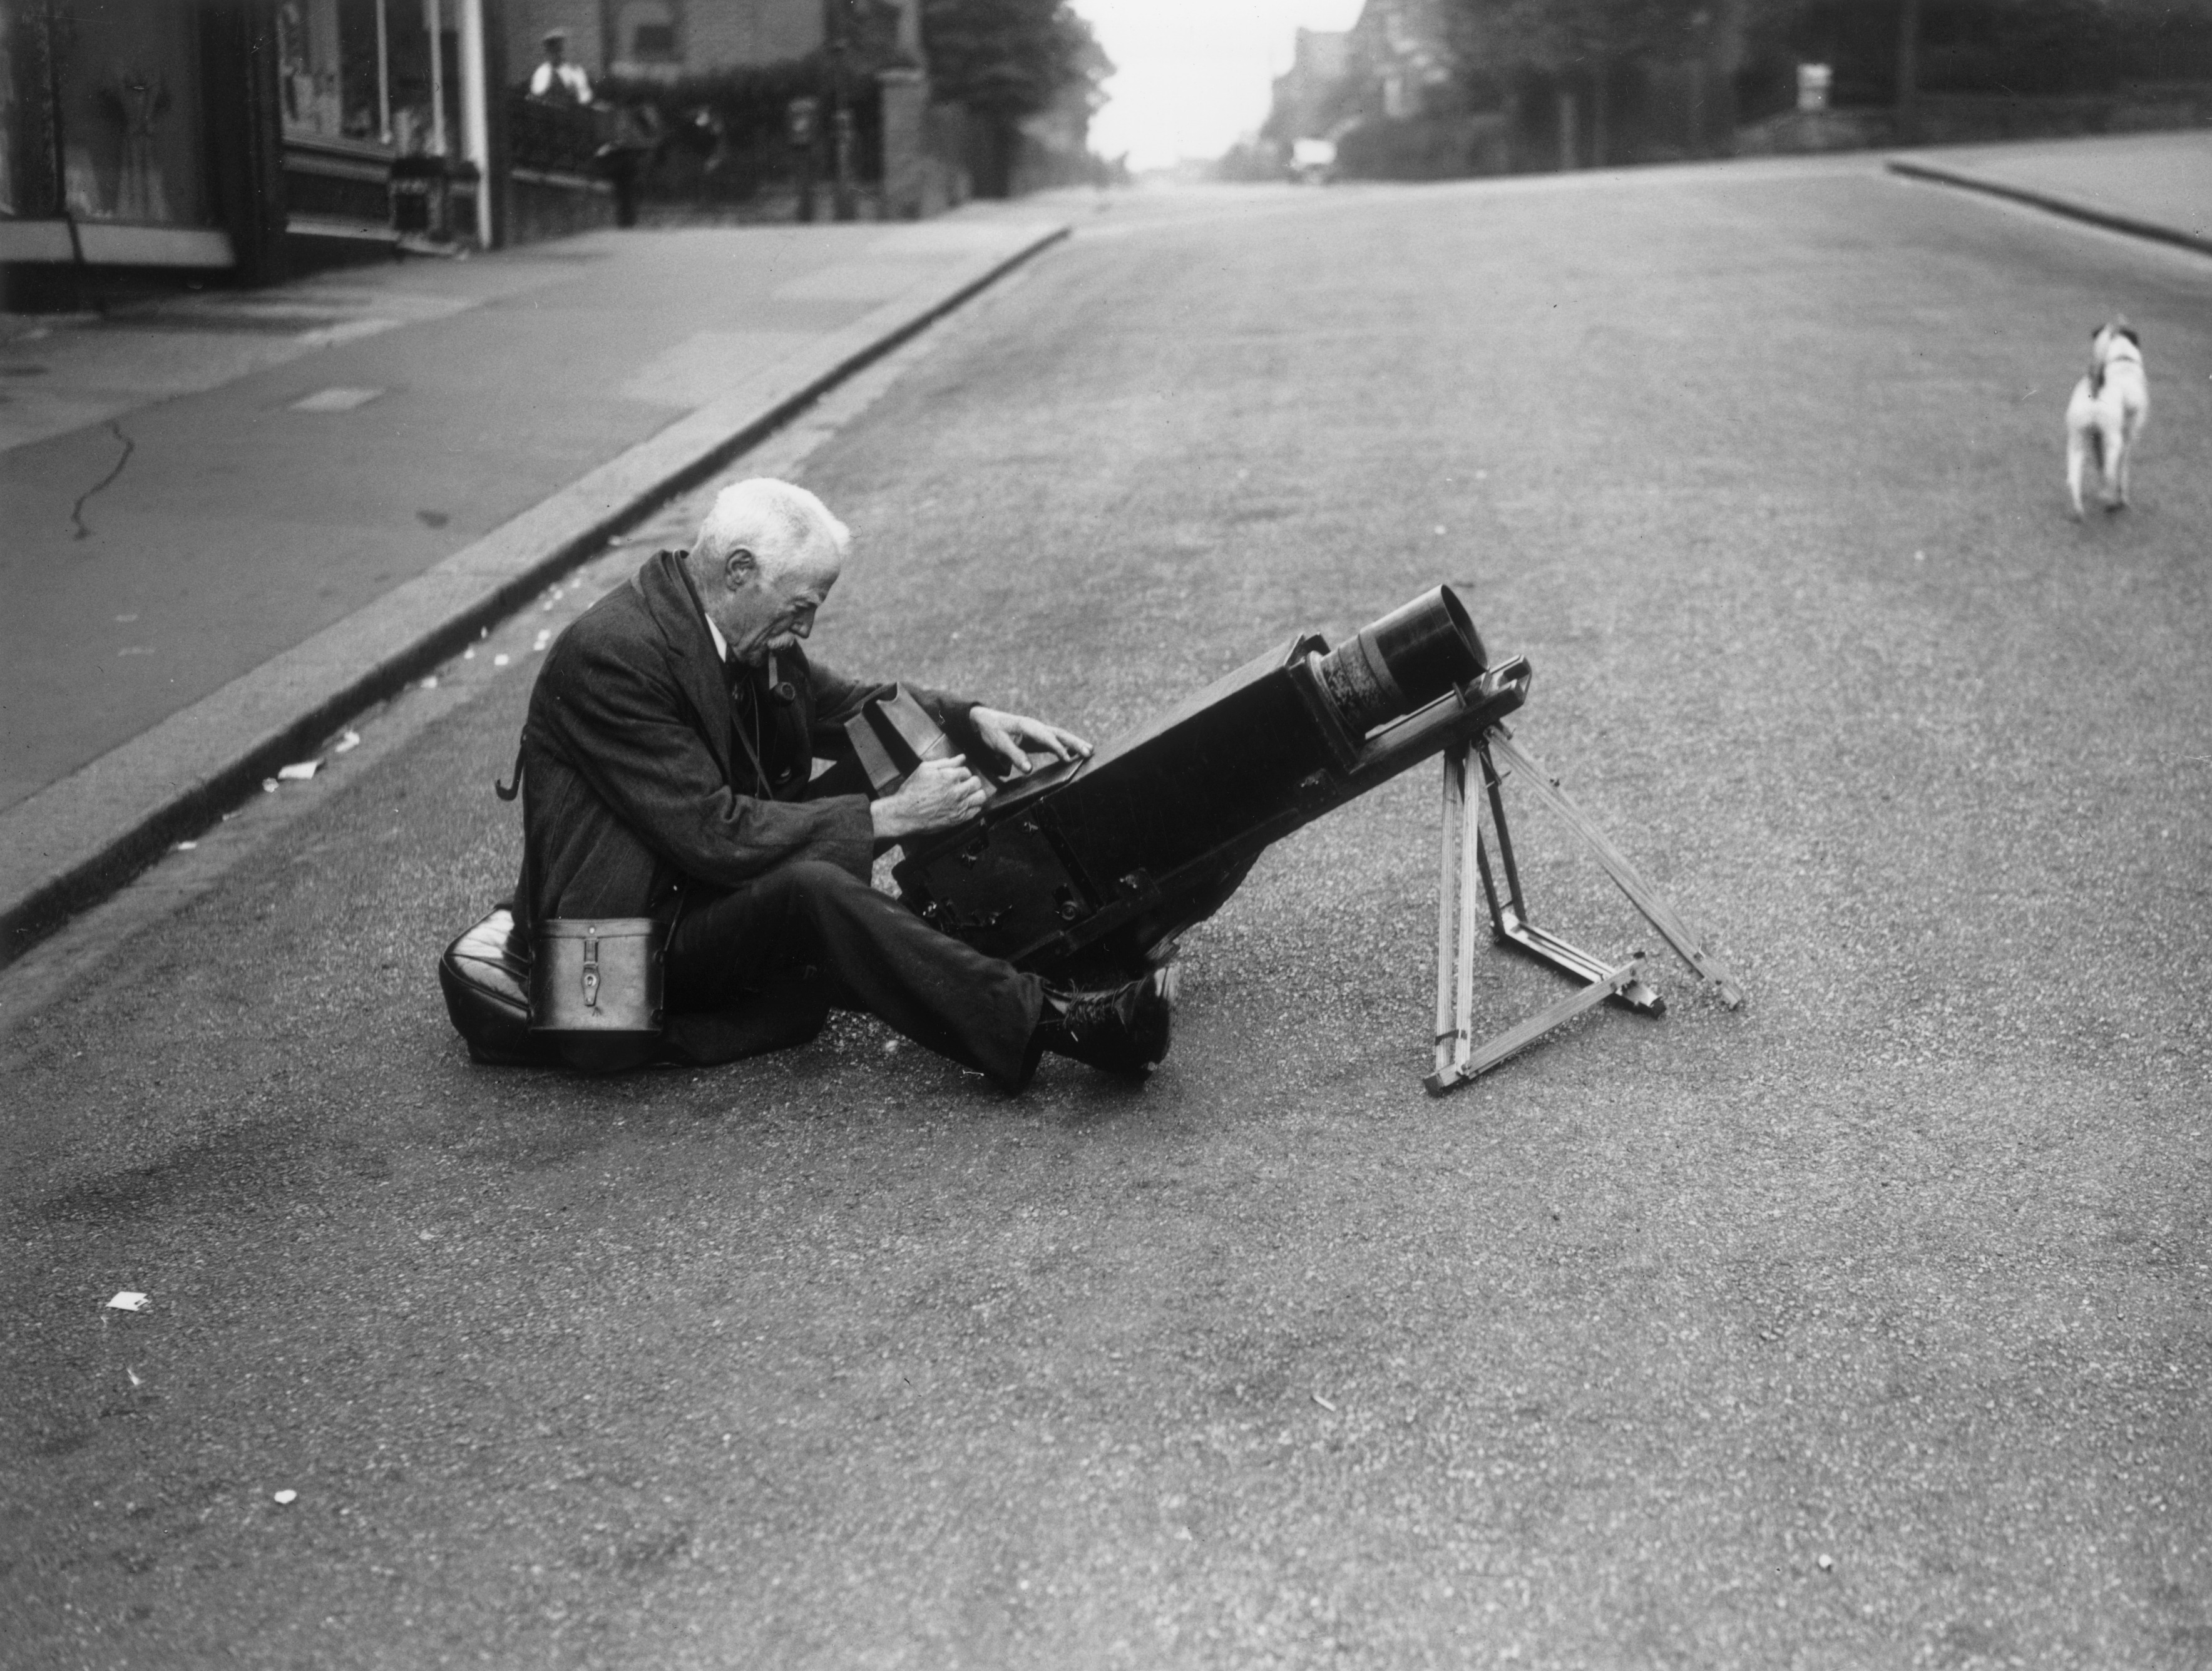 A man sits in the middle of the road with his photography kit and a pipe in his mouth, a small dog is running up the road into the distance.